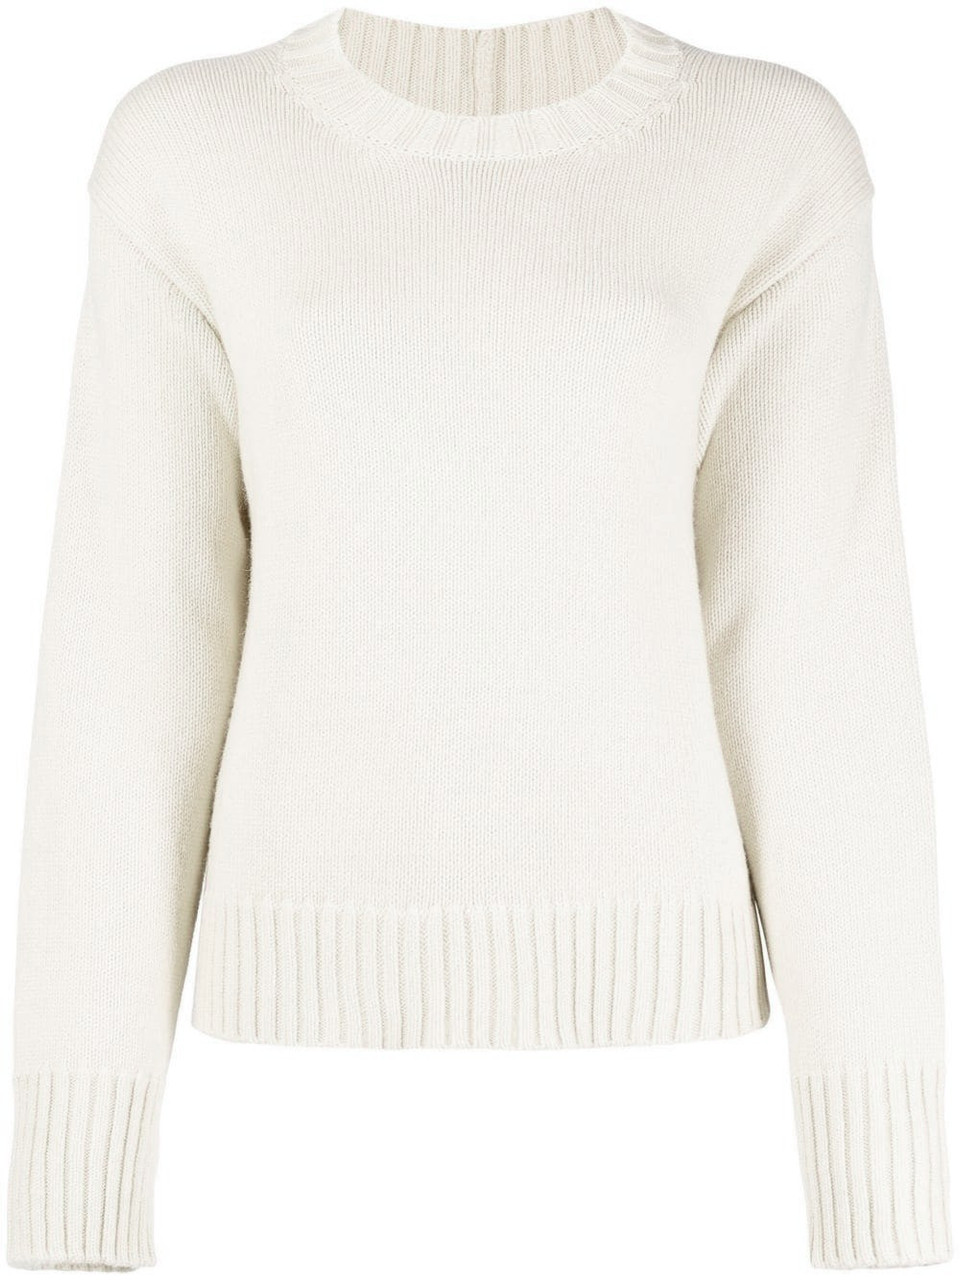 Jil Sander Long Sleeve Cashmere Crew Neck Sweater in Natural